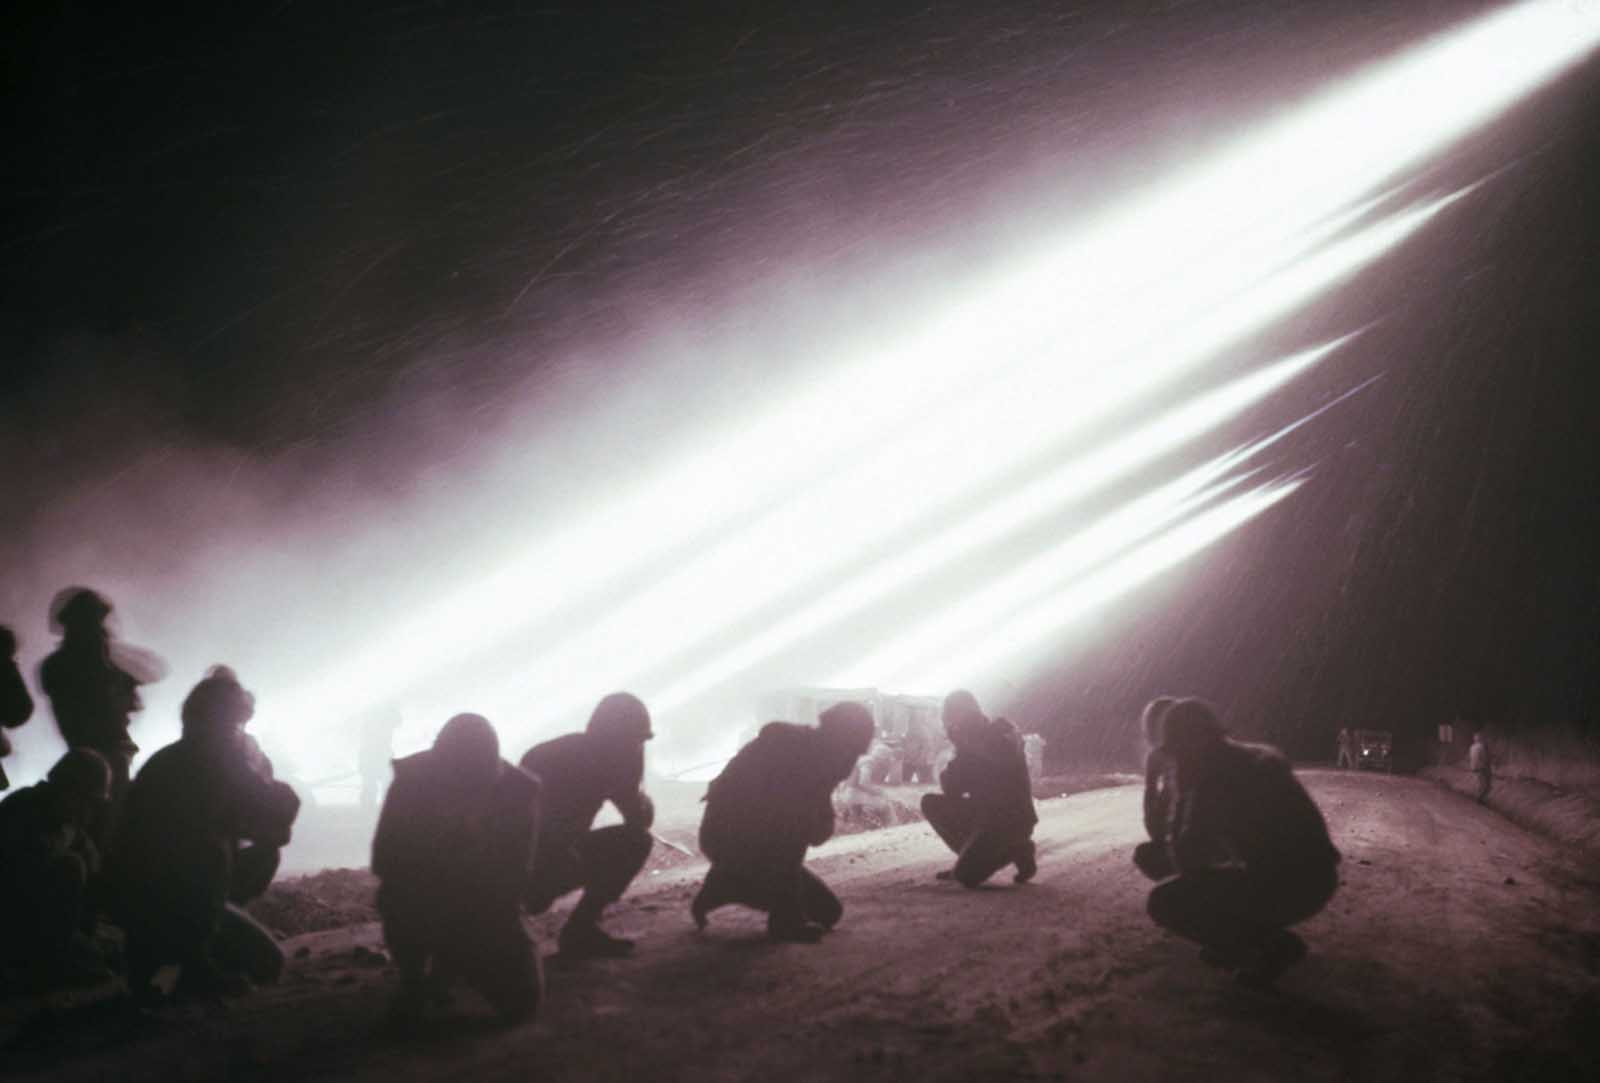 Crew members of a marine battery launcher hold their ears and crouch to the ground as rockets are fired into the night sky.